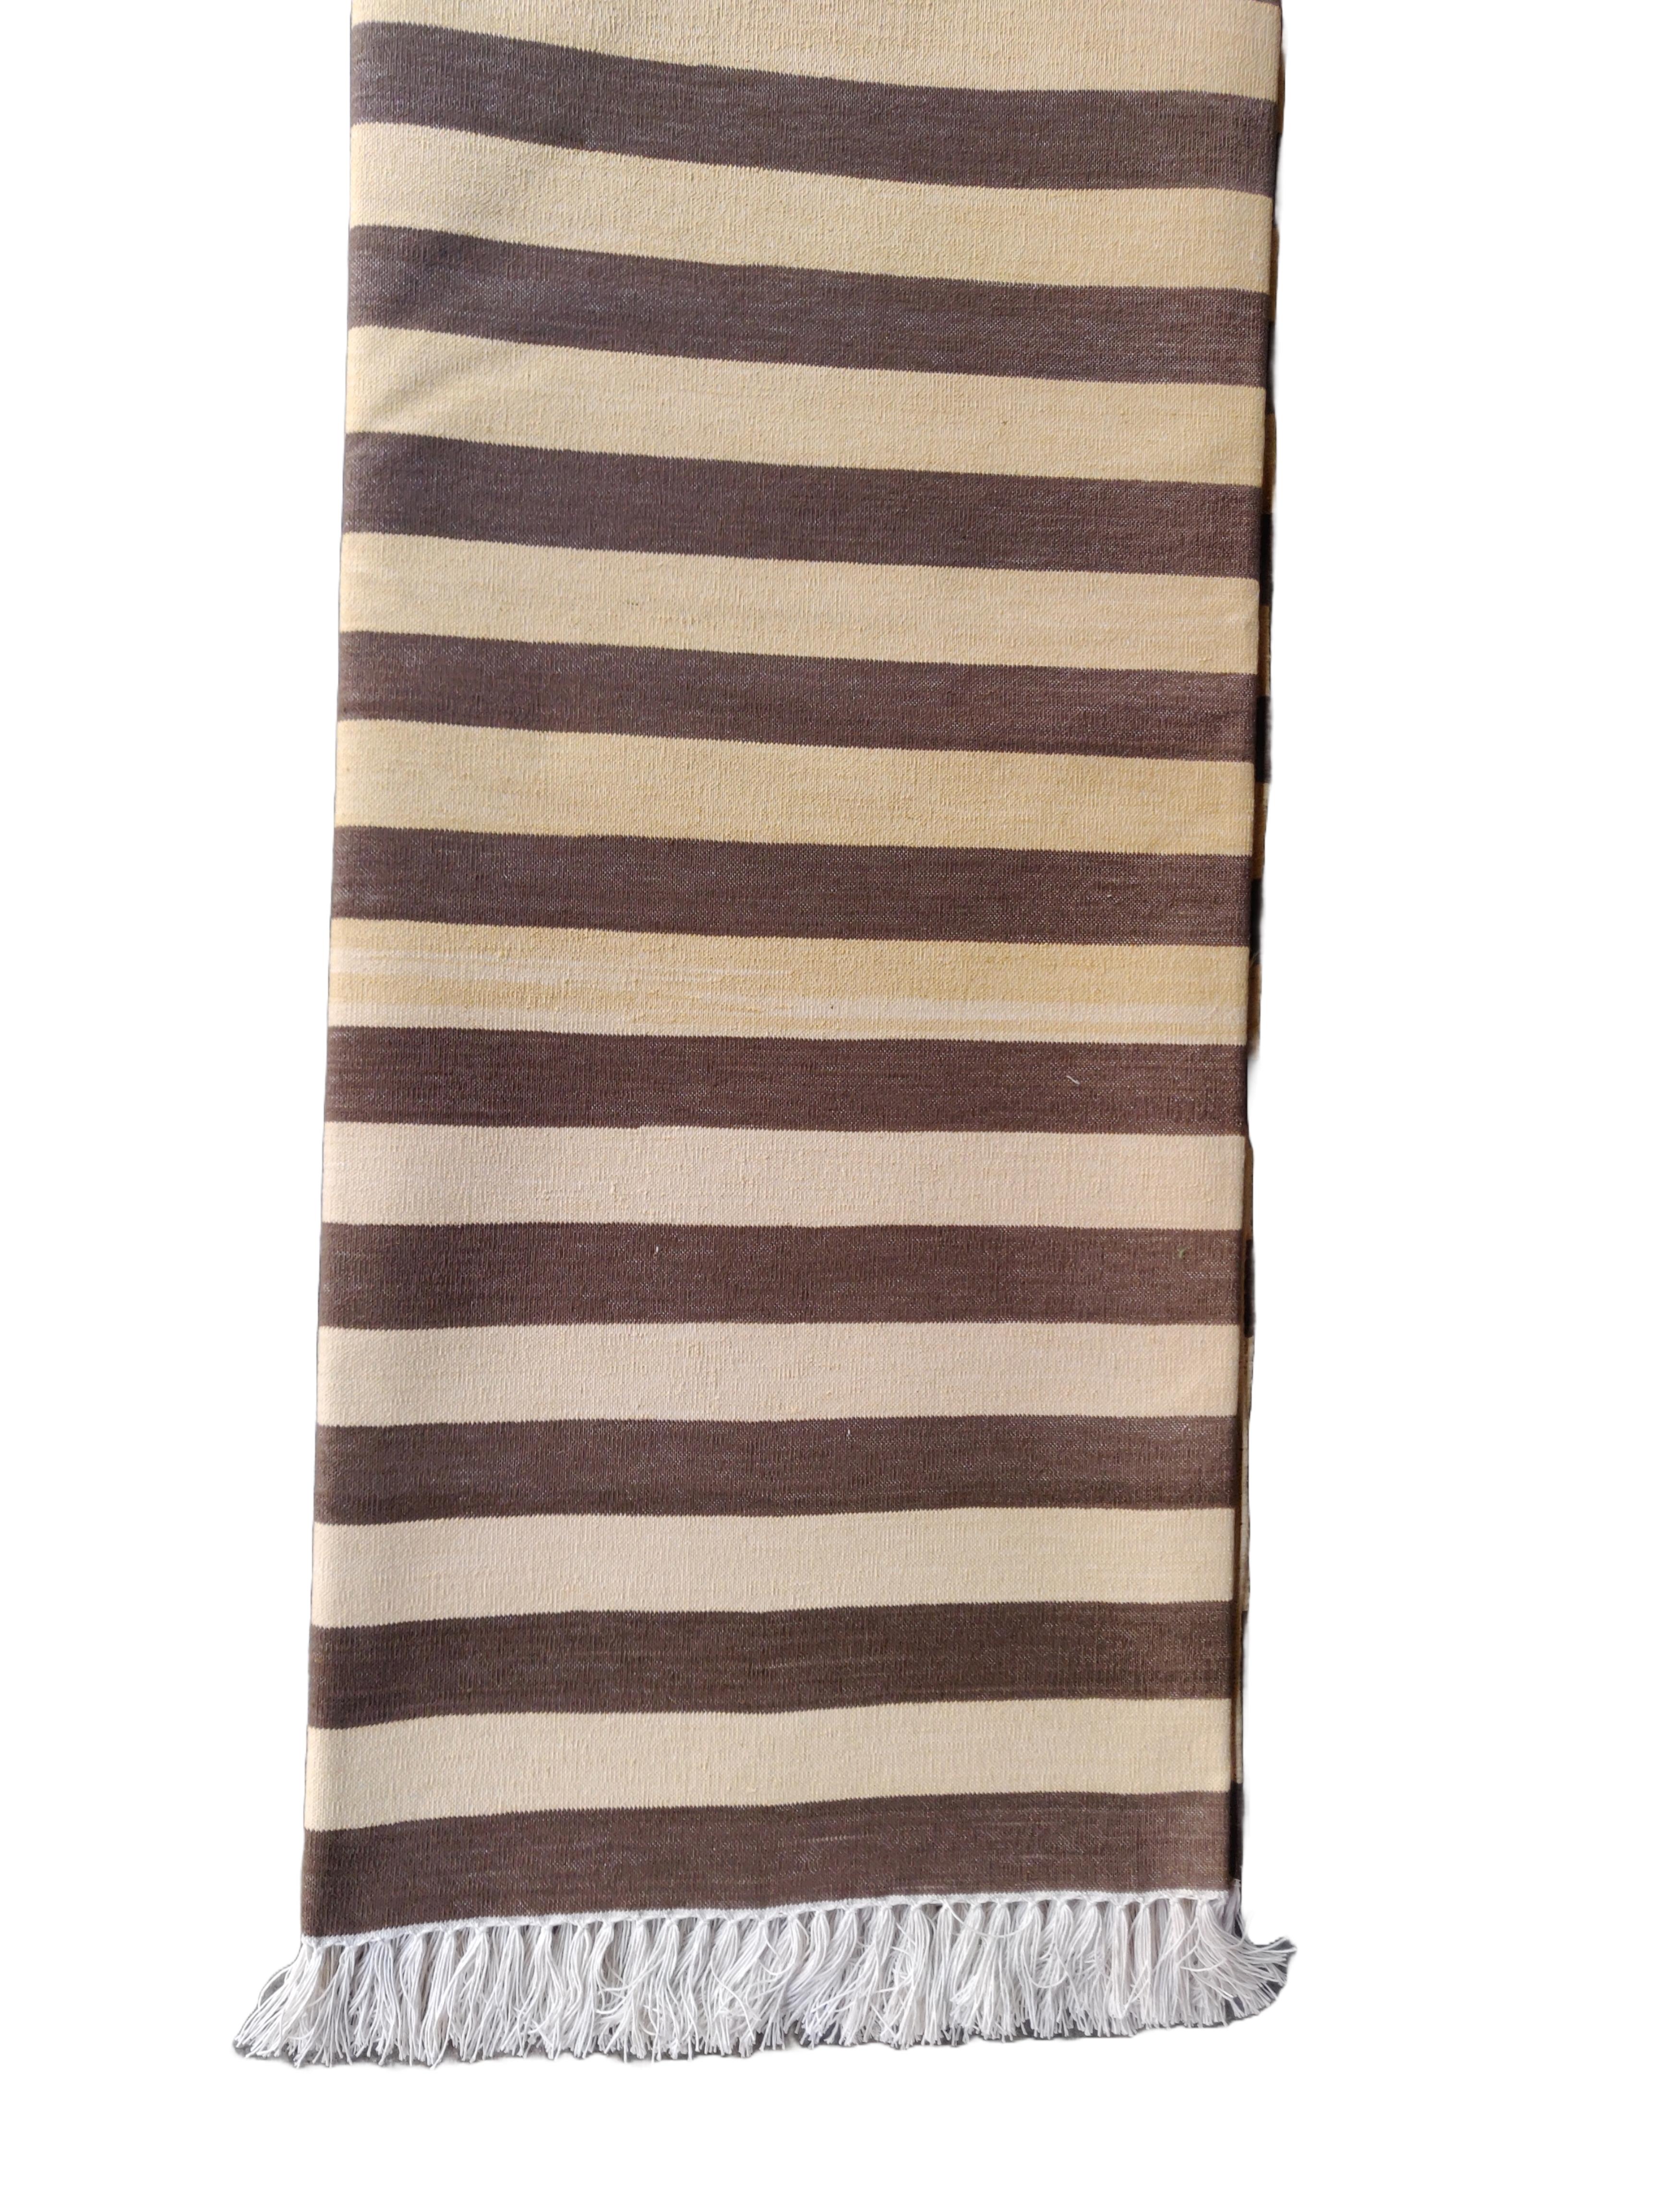 Handmade Cotton Area Flat Weave Rug, 6x9 Brown And Yellow Striped Indian Dhurrie For Sale 2